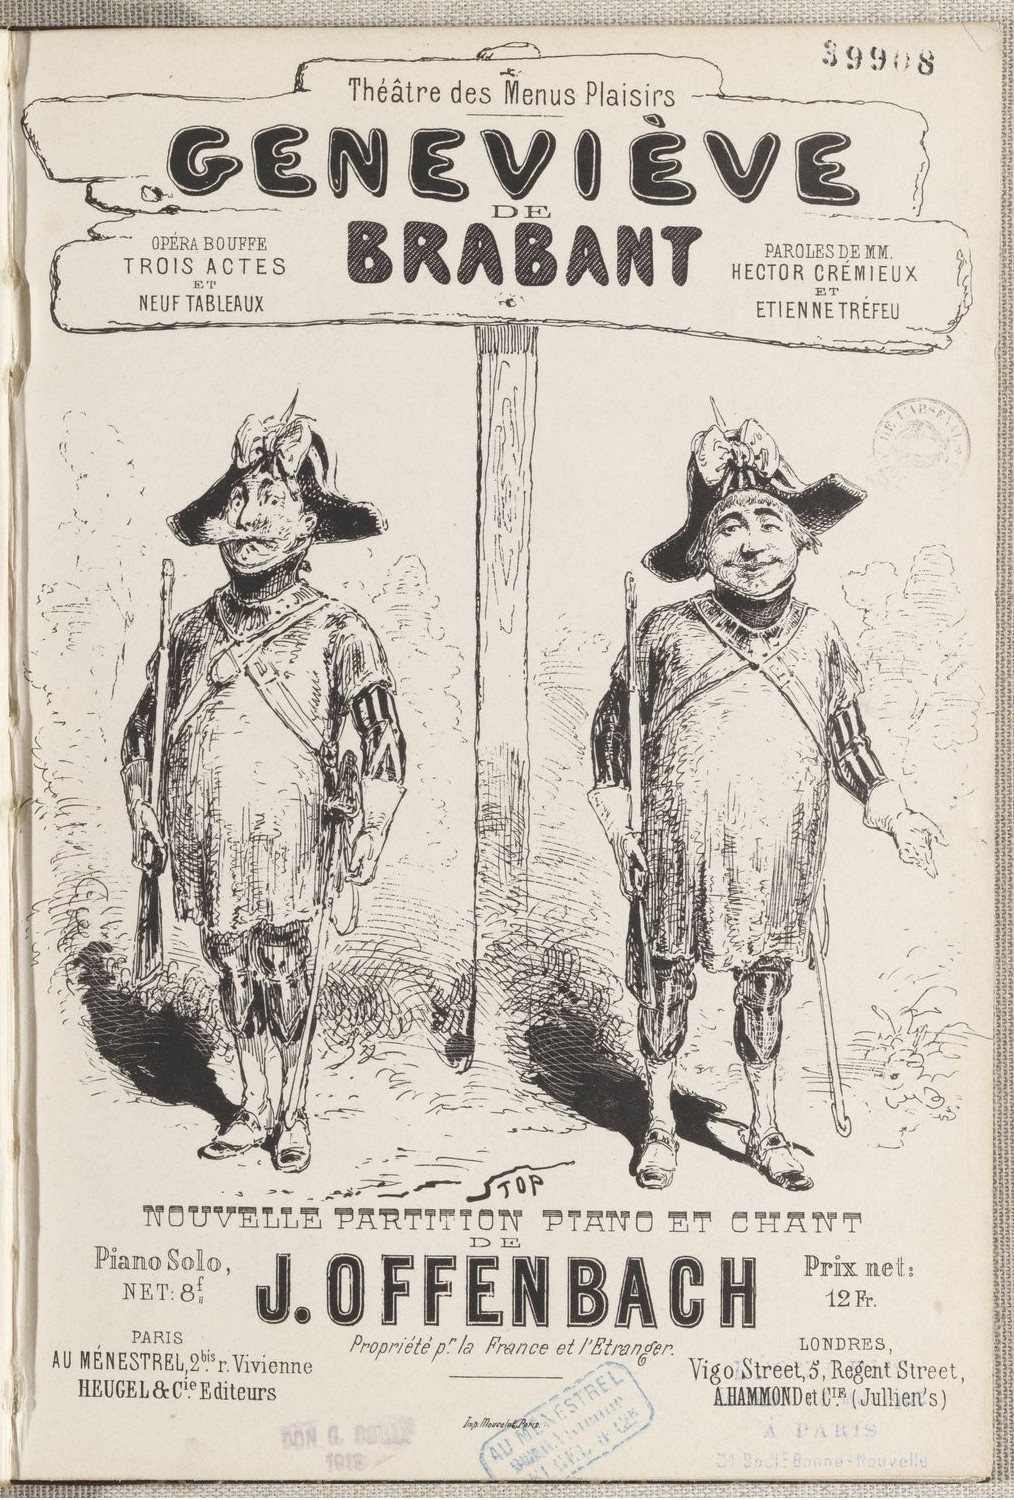 The cover of the piano score for "Geneviève de Brabant."